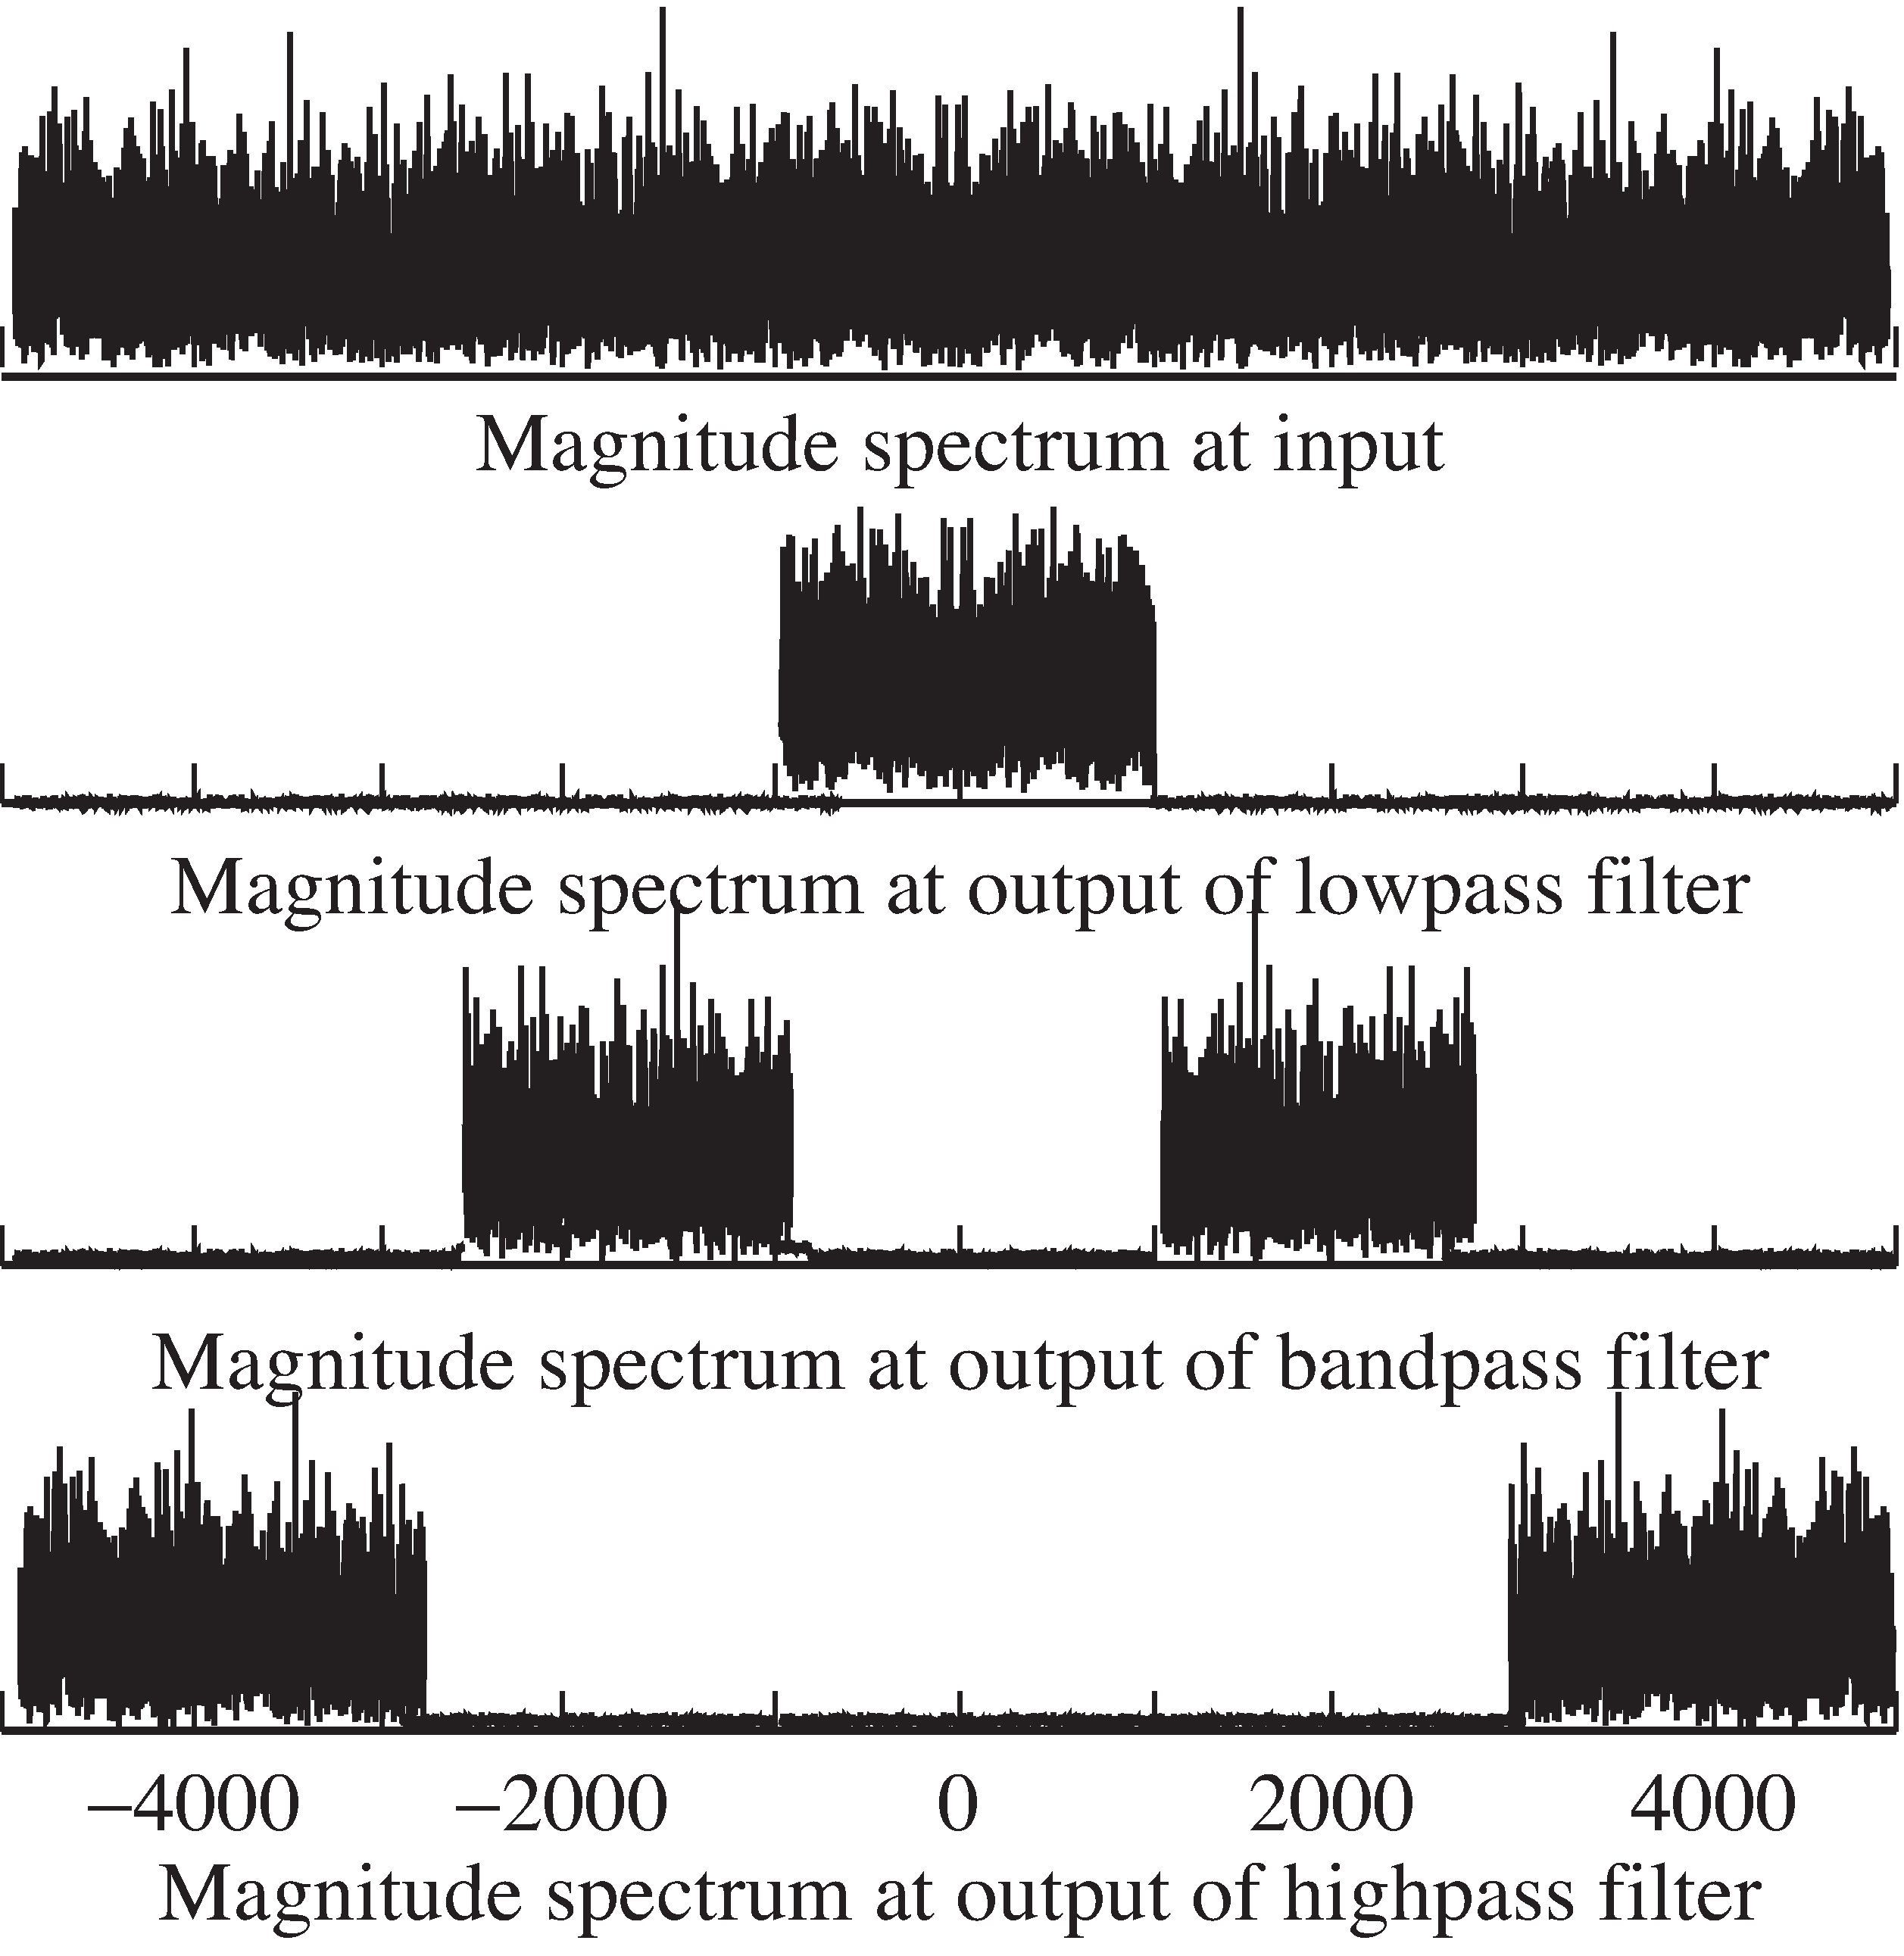 The spectrum of a “white” signal containing all frequencies is shown in the top figure. This is passed through three filters: a lowpass, a bandpass, and a highpass. The spectra at the outputs of these three filters are shown in the second, third, and bottom plots. The “actual” filters behave much like their idealized counterparts in Figure 3-6.